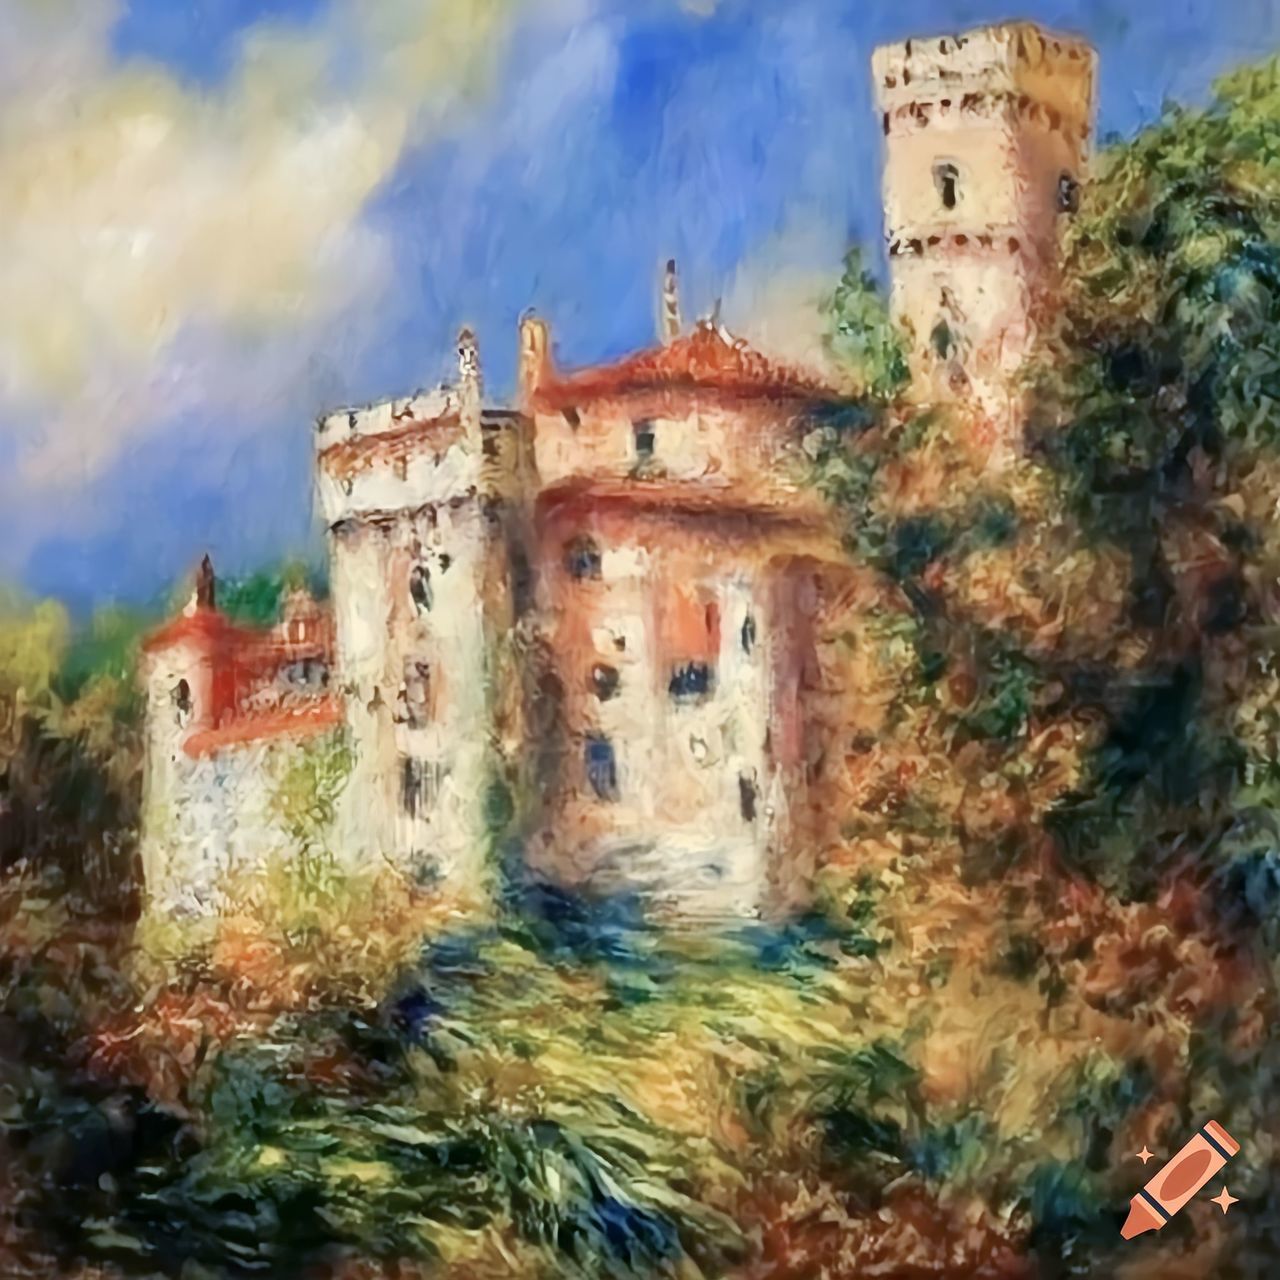 architecture, castle, built structure, building exterior, building, painting, history, the past, sky, nature, cloud, old, plant, château, no people, fort, travel destinations, tree, water castle, medieval, day, outdoors, abandoned, travel, moat, house, watercolor paint, land, ancient, wall, old ruin